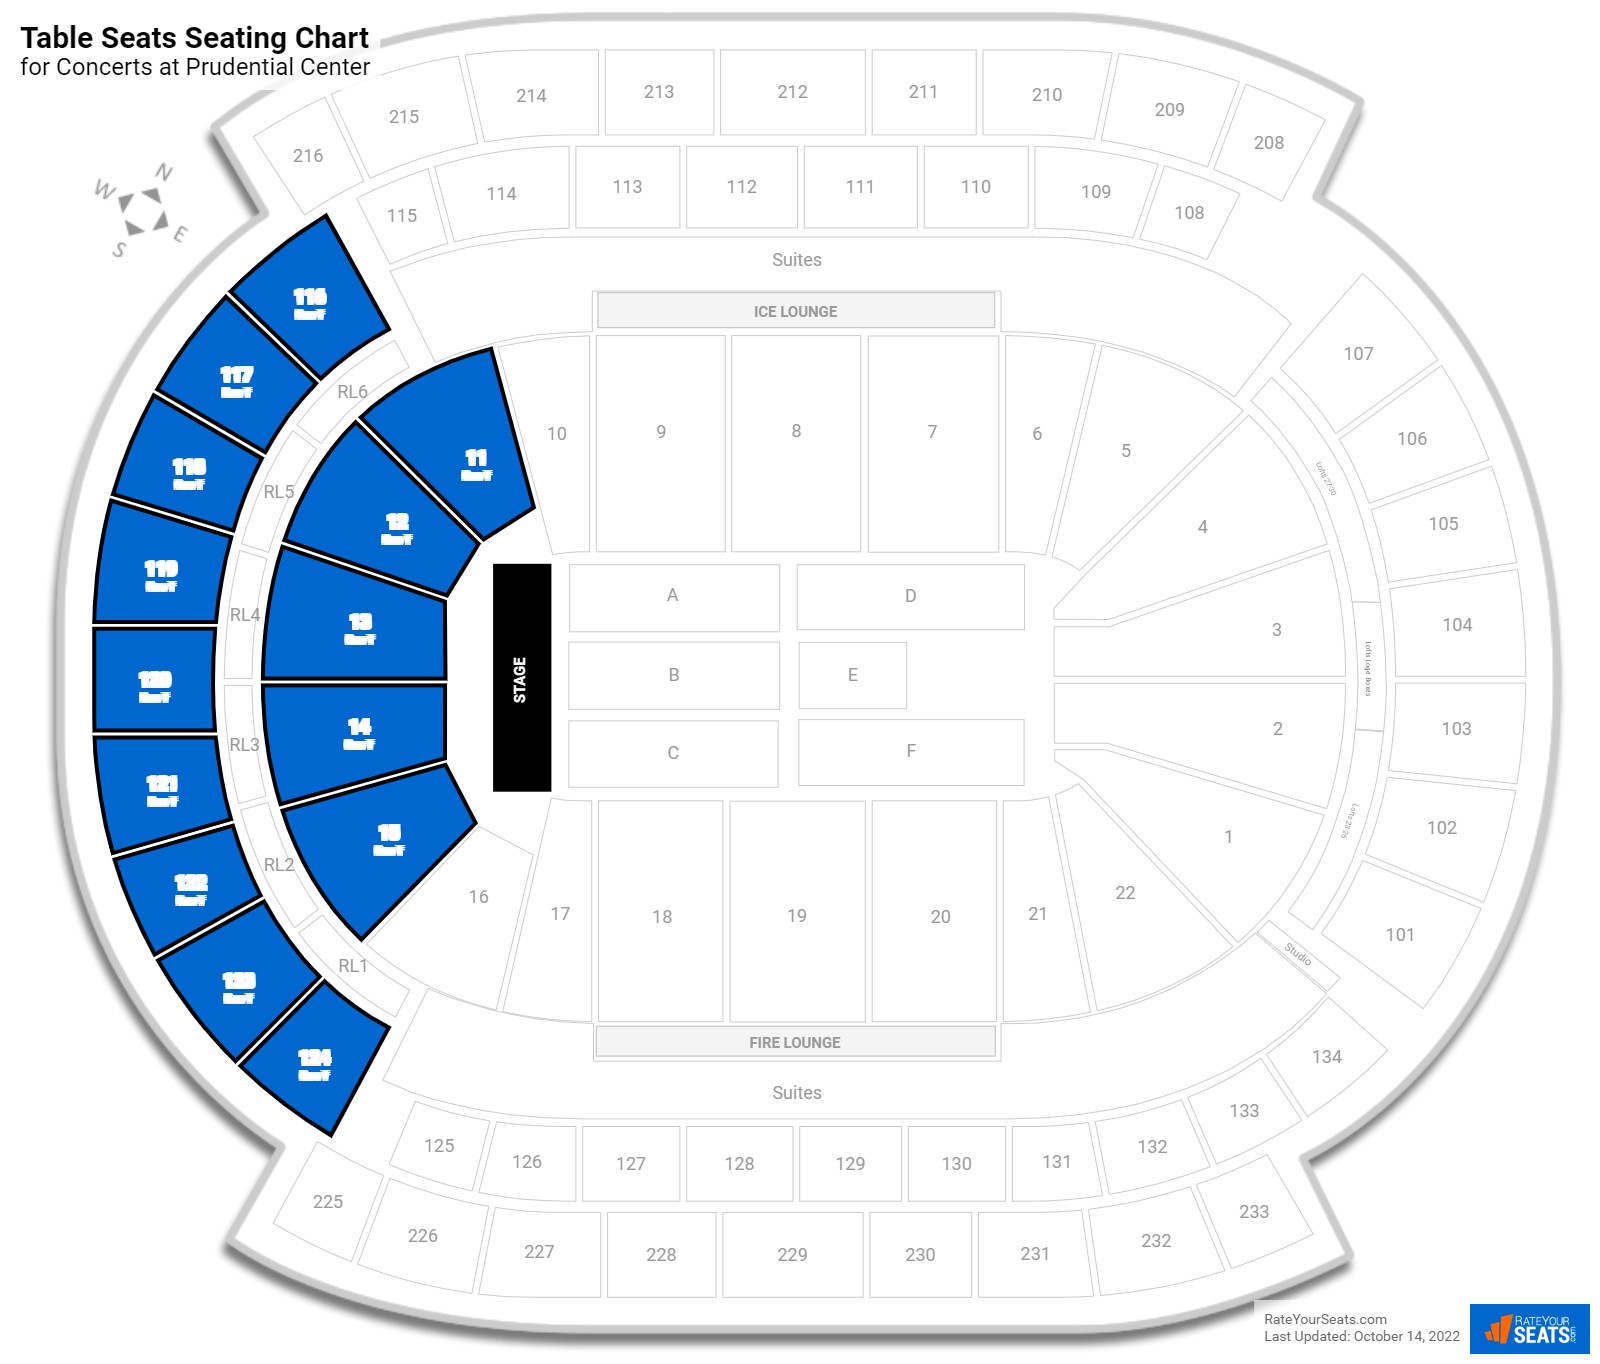 Prudential Center Seating Chart Comedy - Seat Number Prudential